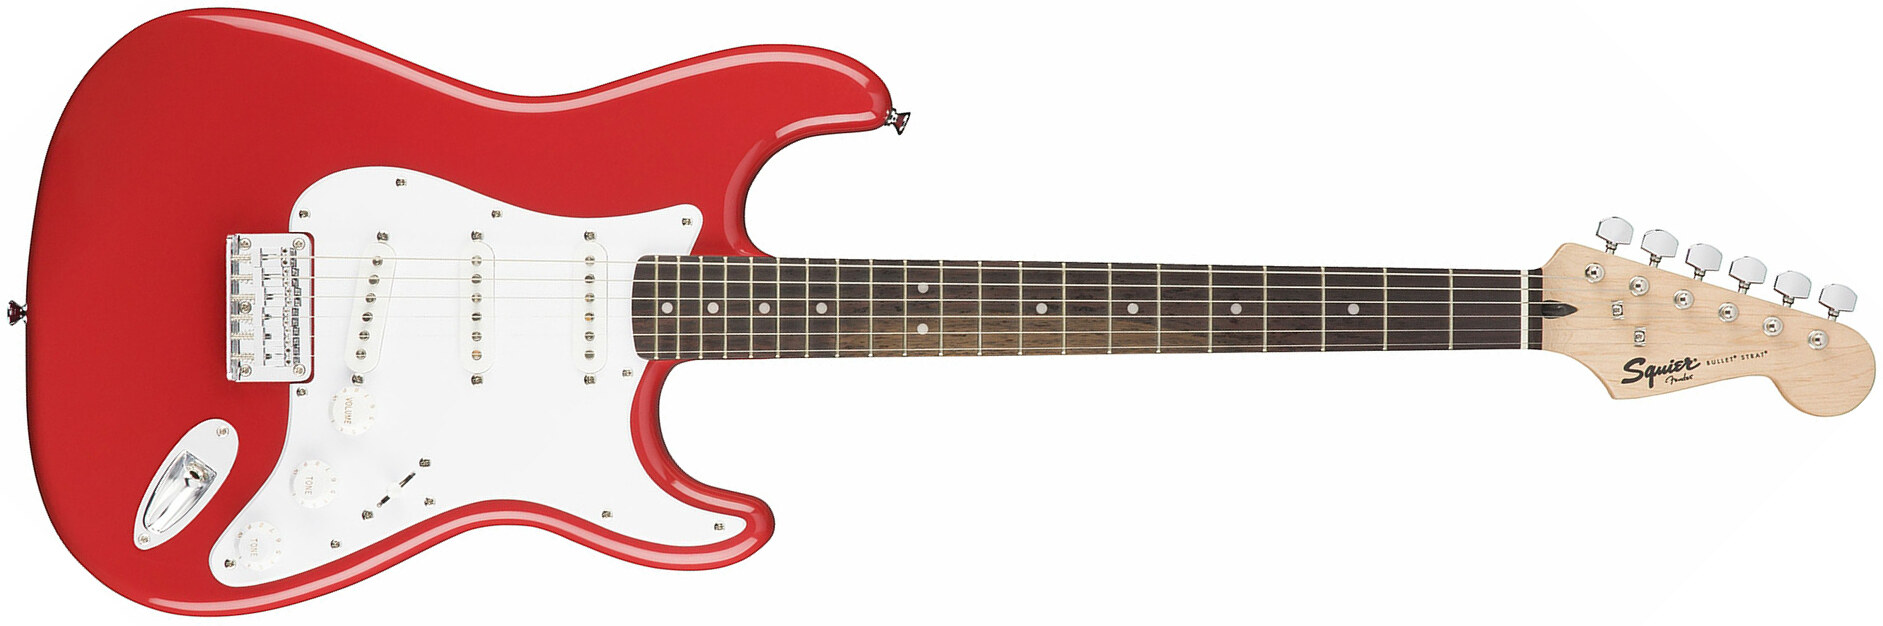 Squier Strat Bullet Ht Sss Rw - Fiesta Red - Str shape electric guitar - Main picture